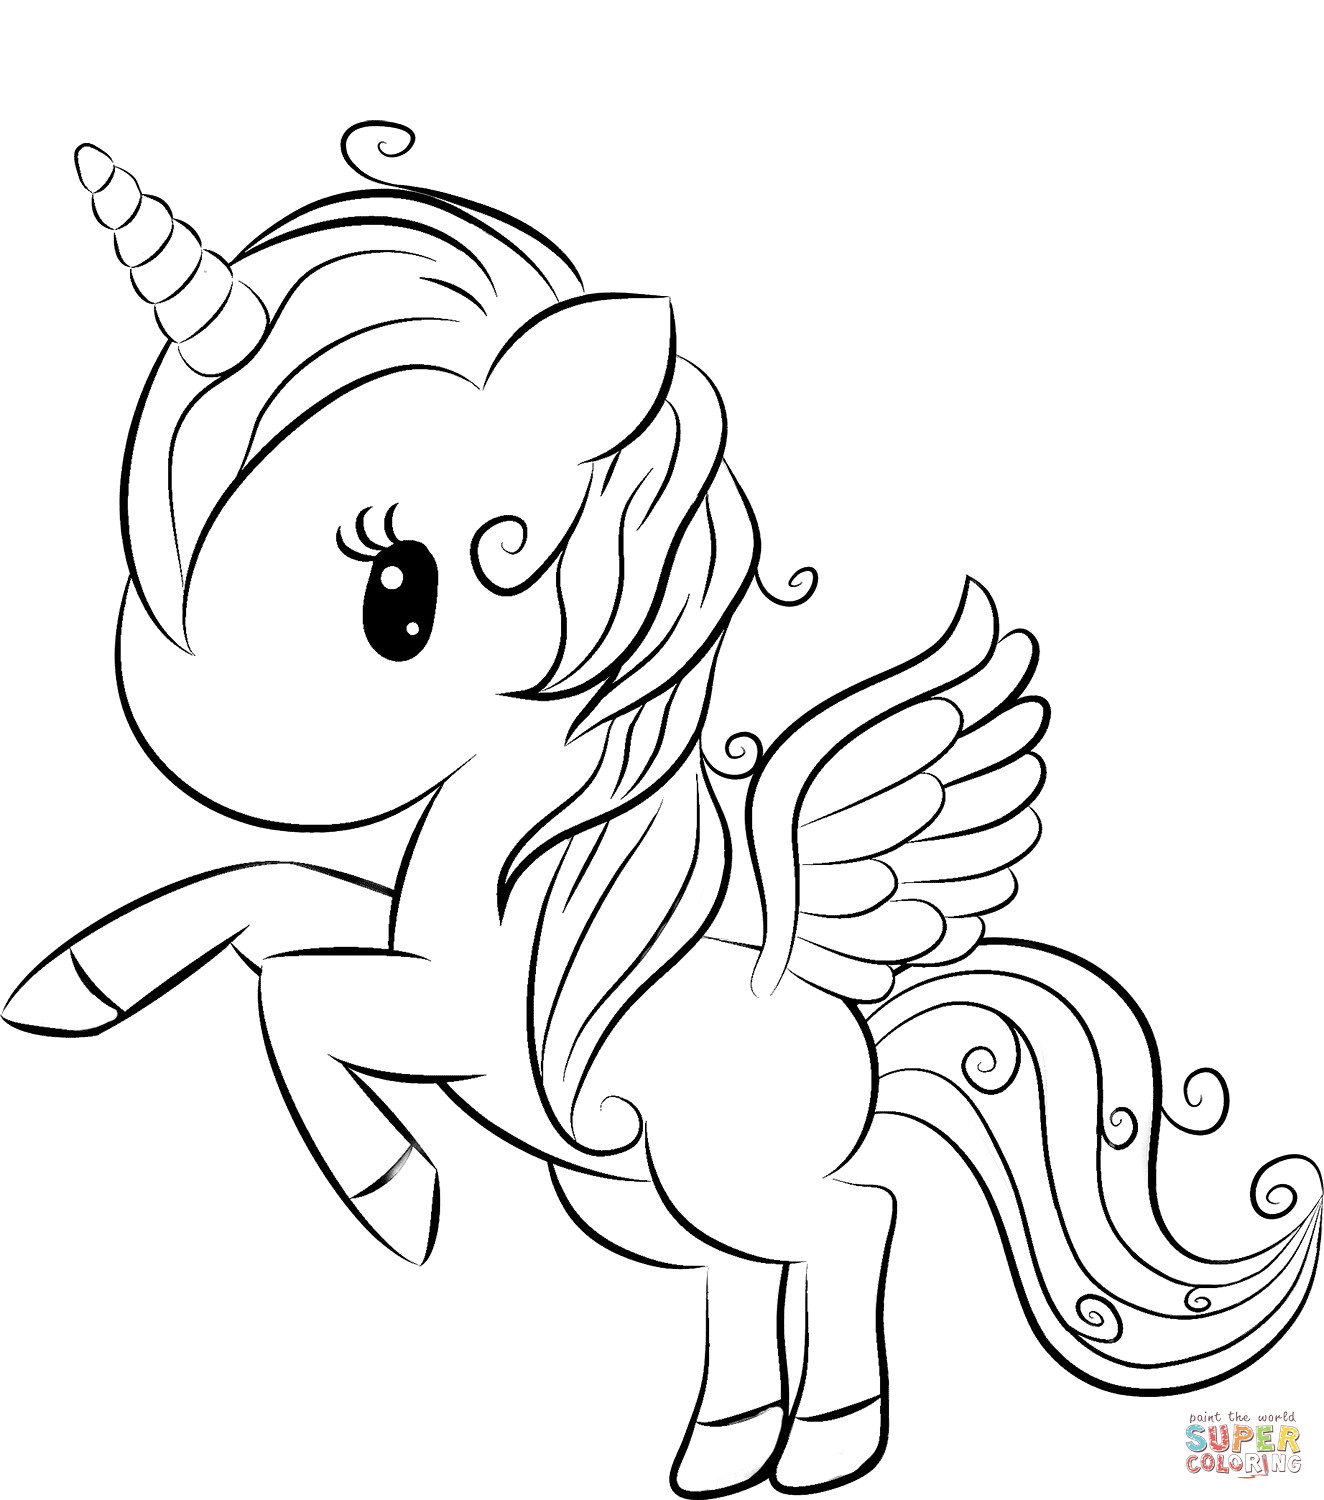 Unicorn Girl Coloring Pages
 Cute Unicorn coloring page